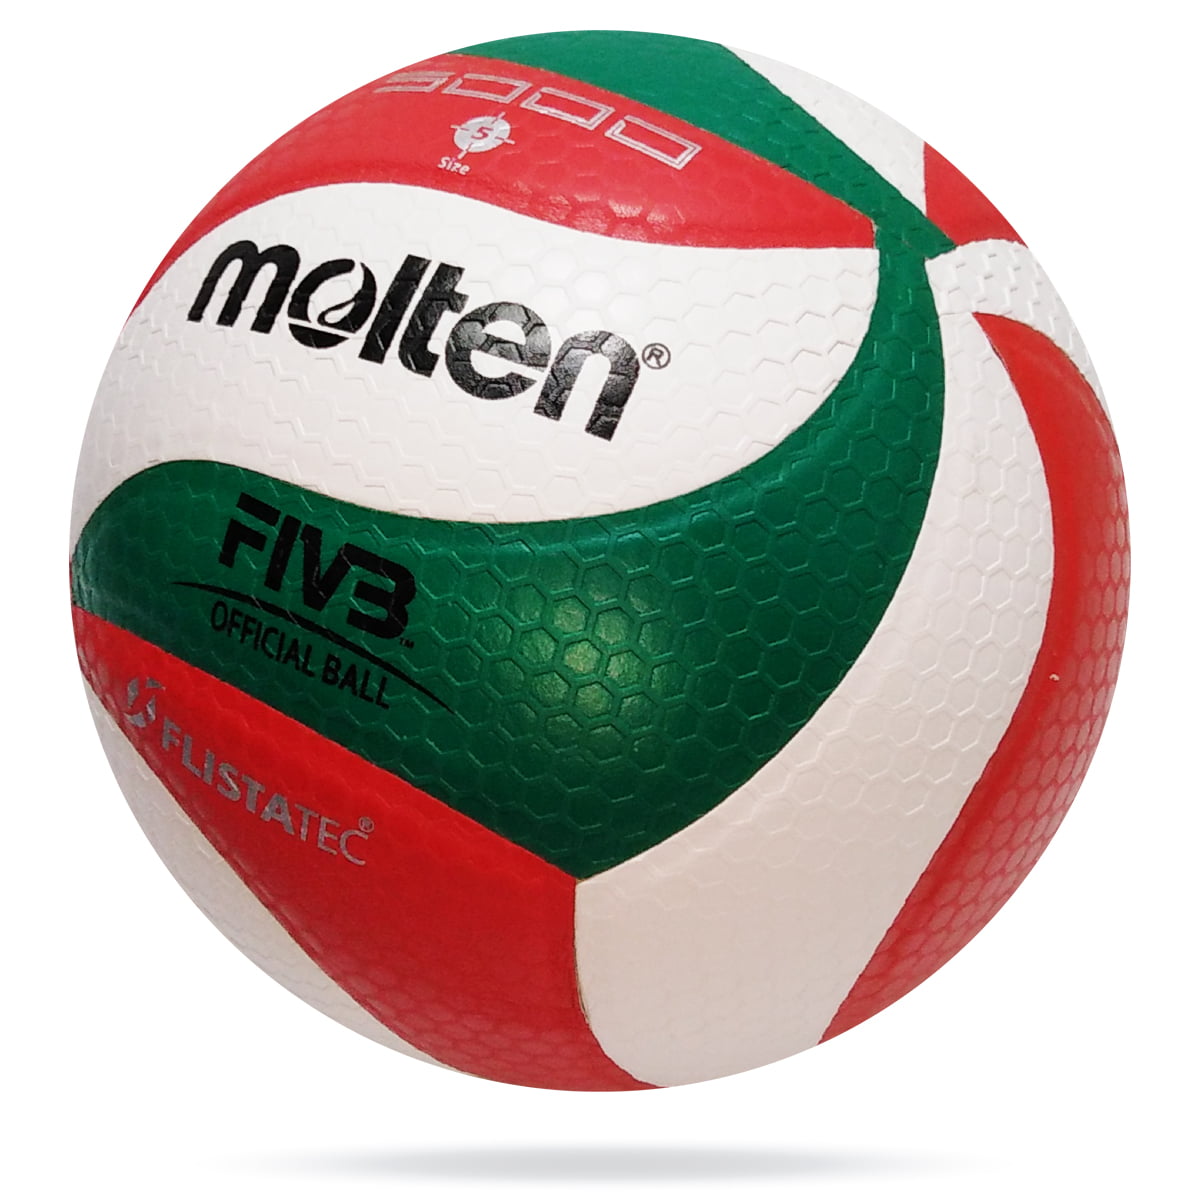 Molten Volleyball #v5 M5000 Soft Touch PU Leather Indoor Outdoor Game Standart 